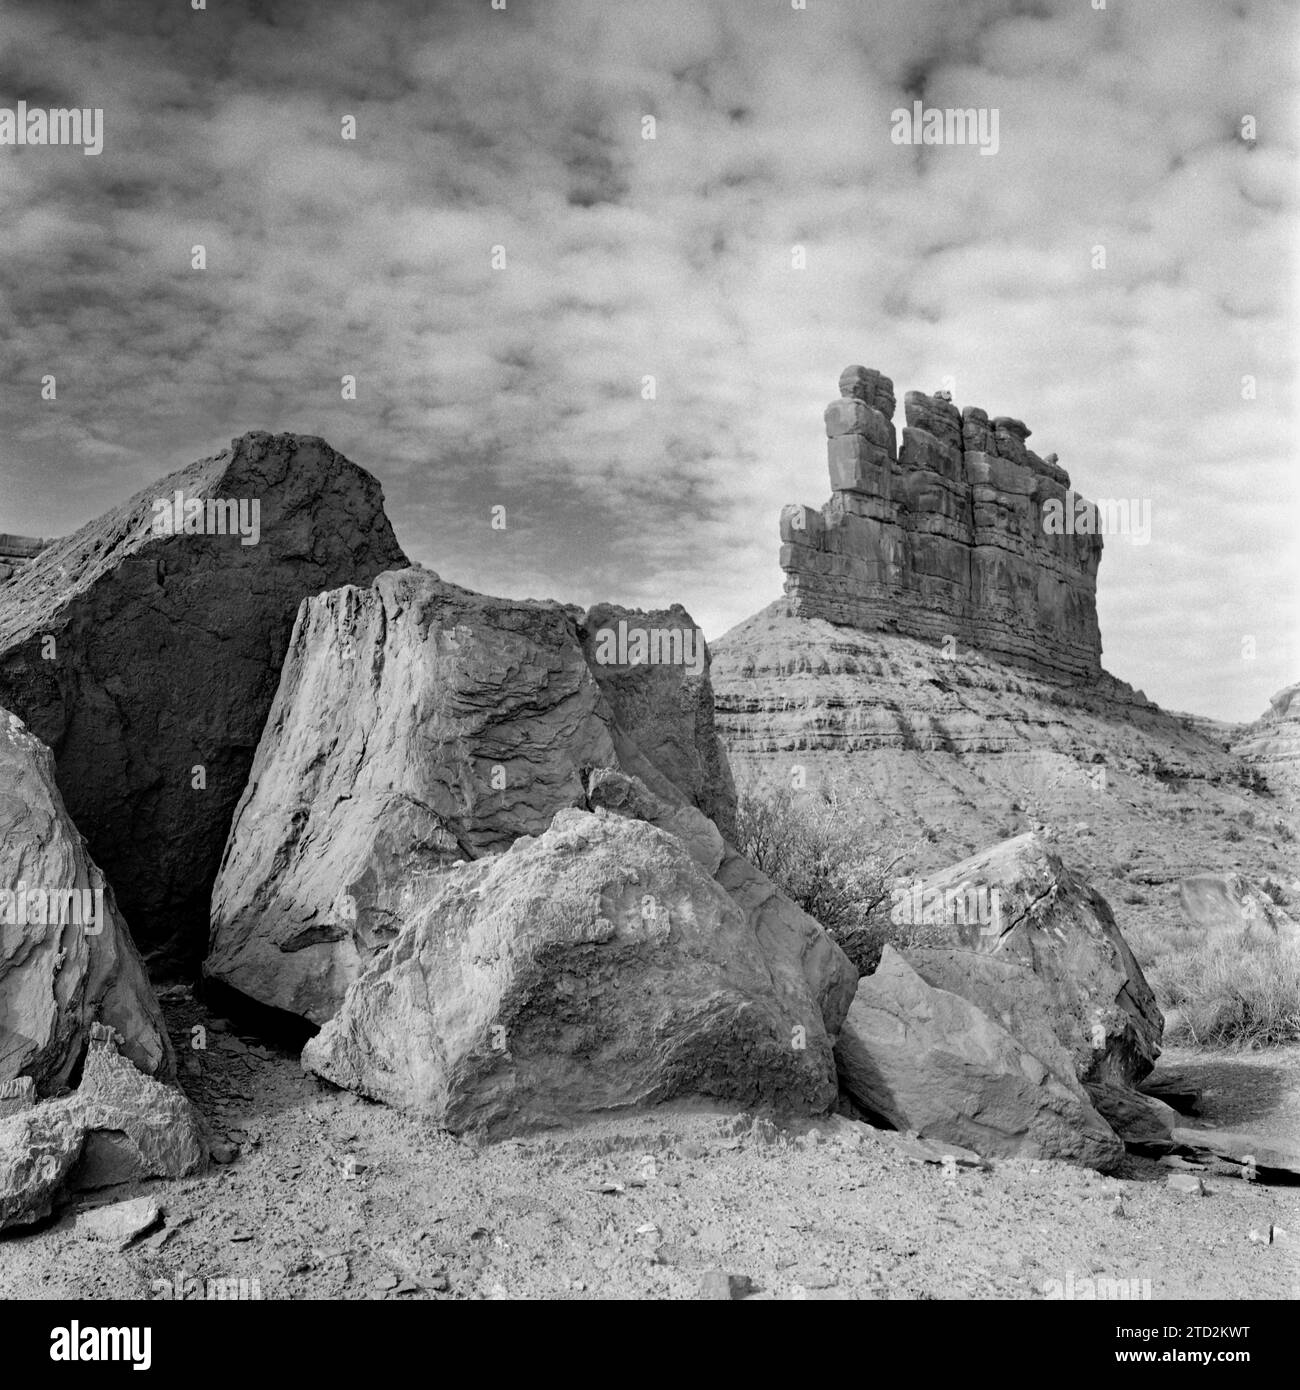 HB44103-00....UTAH - Boulders and Sandstone butte in Valley of the Gods. Foto Stock